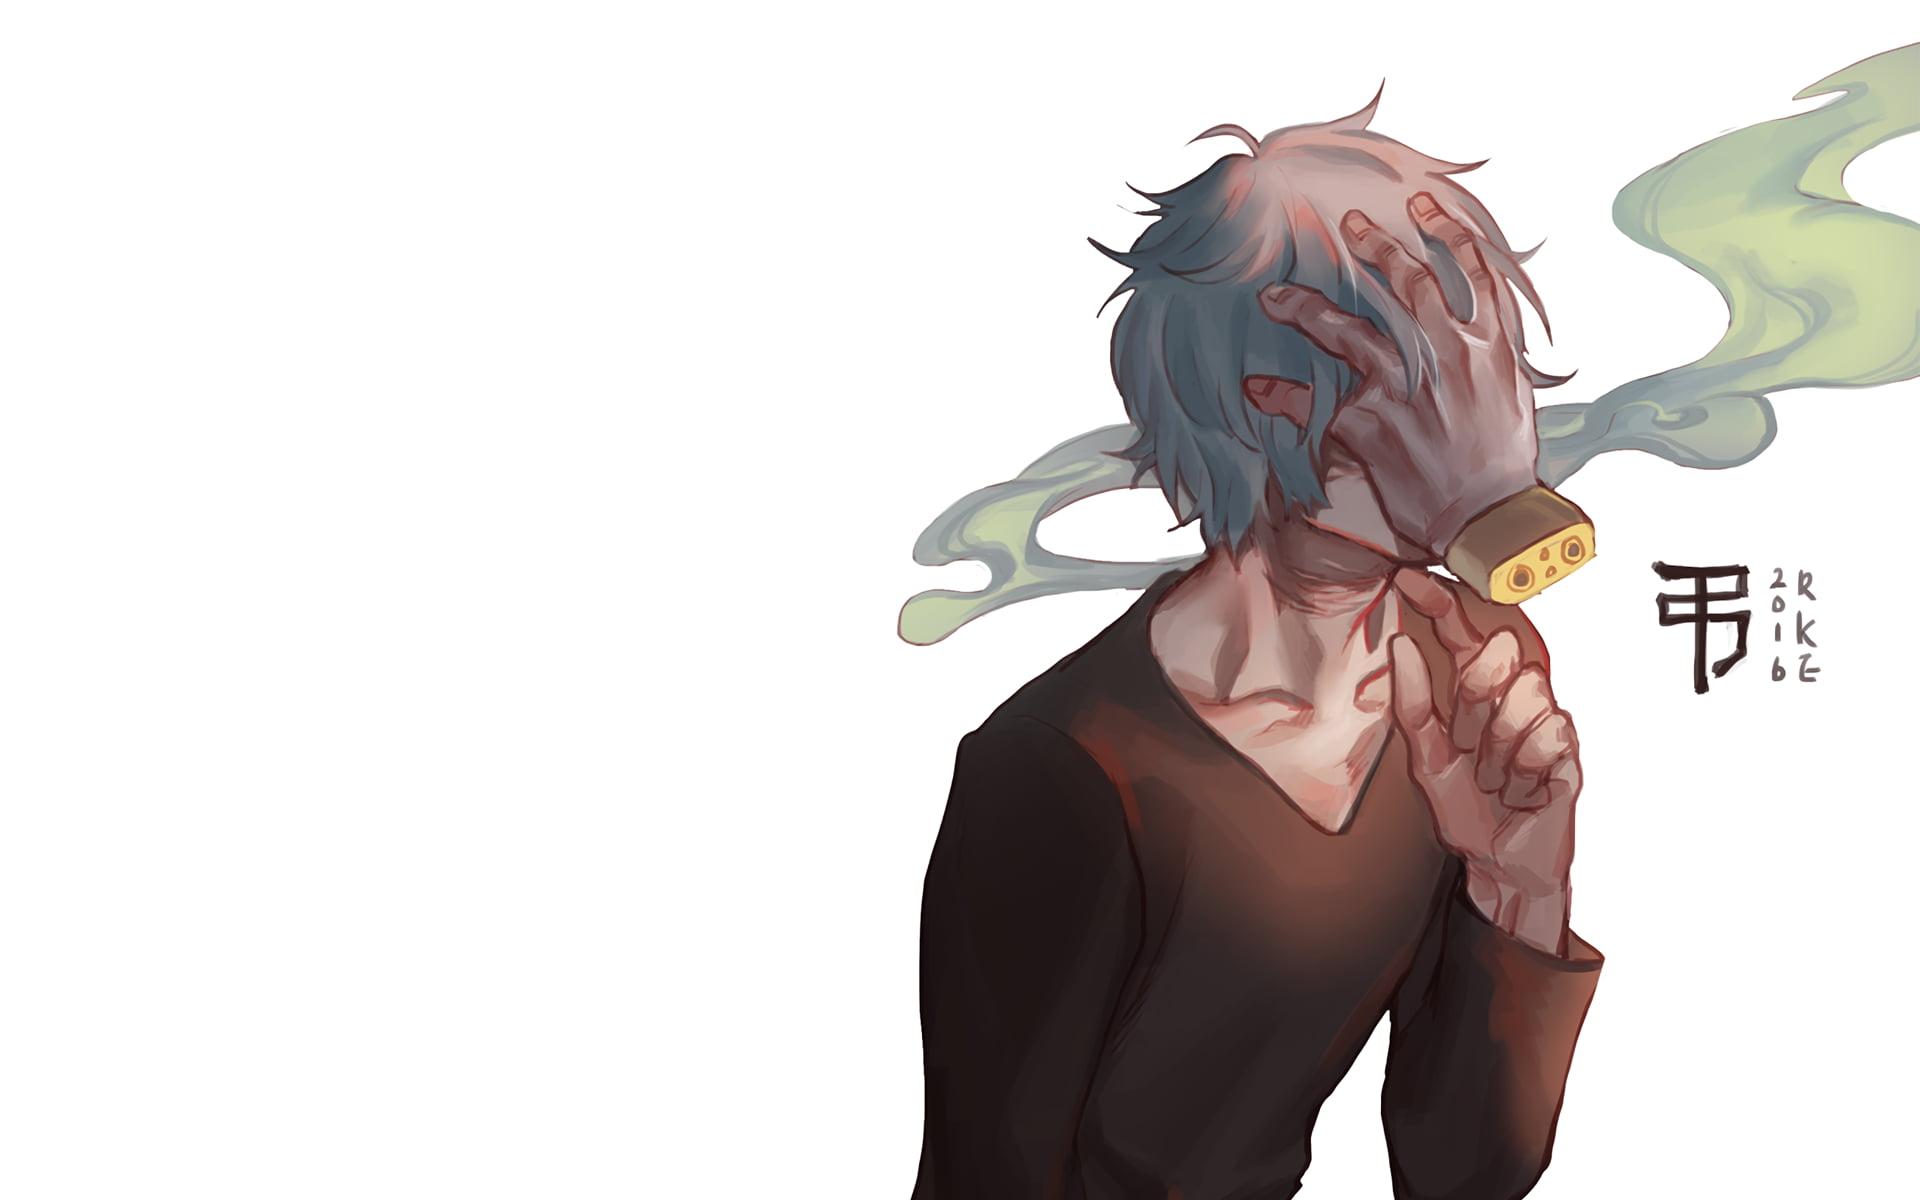 Man in black sweater with hand on face illustration, Boku no Hero